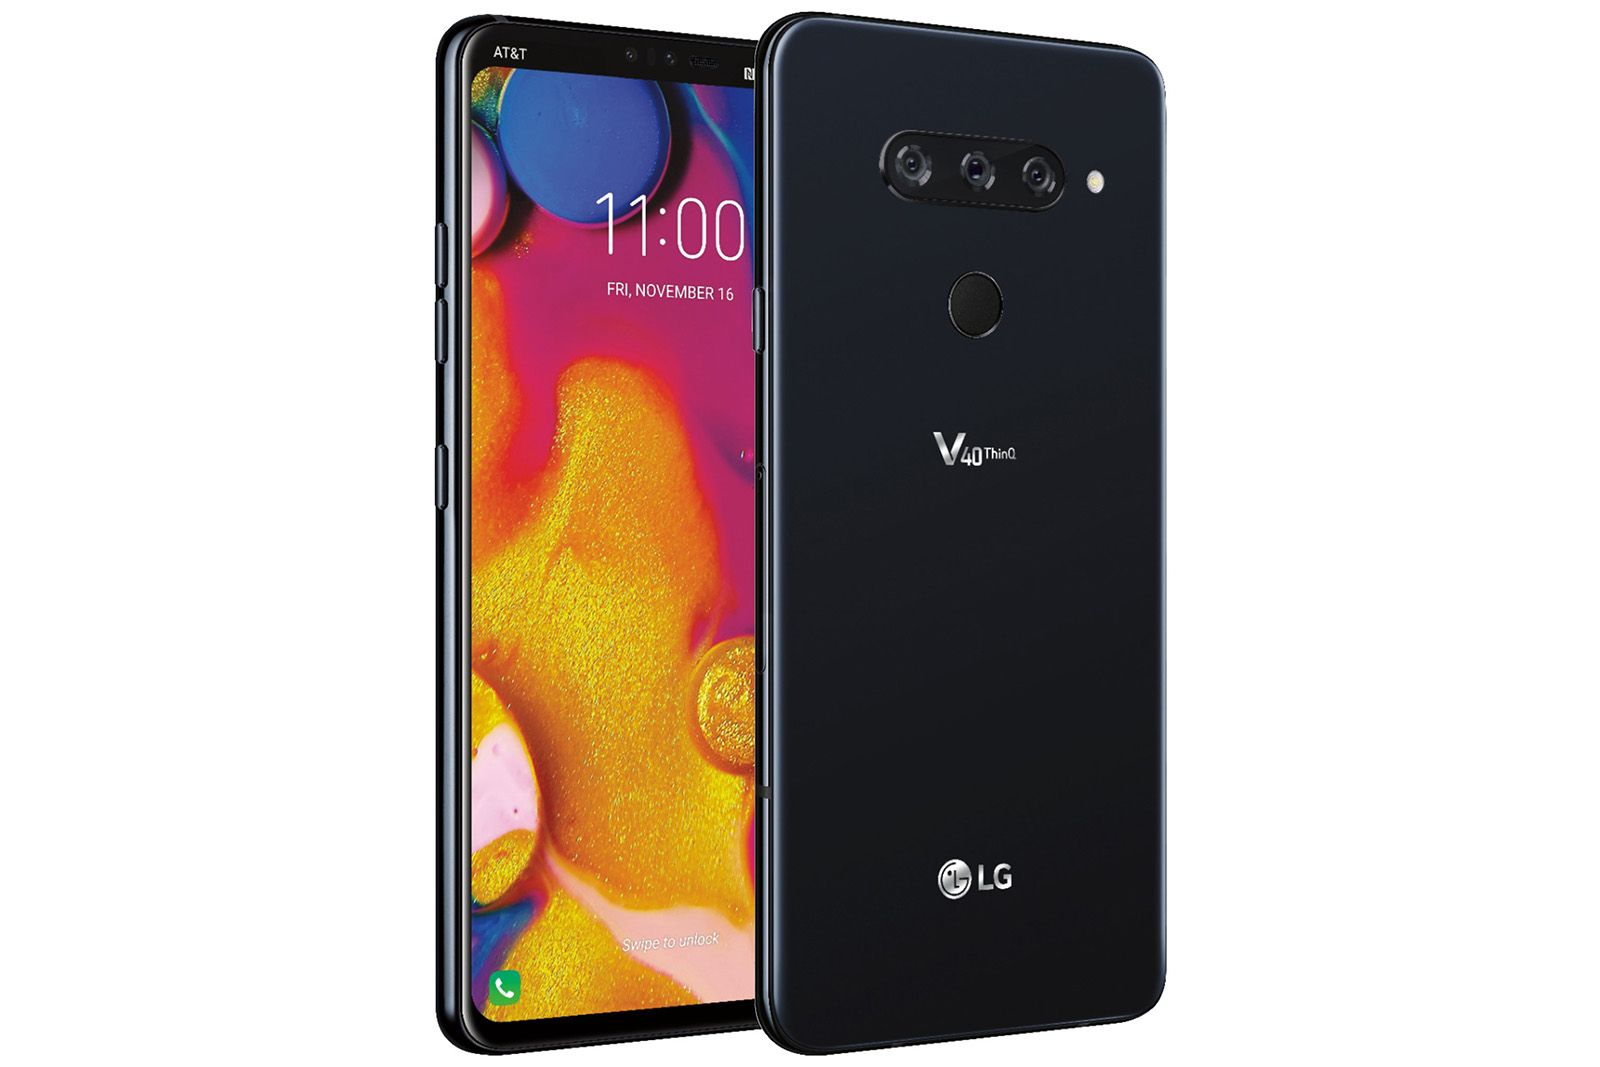 LG V40 ThinQ press render shows phone ahead of next weeks launch image 1